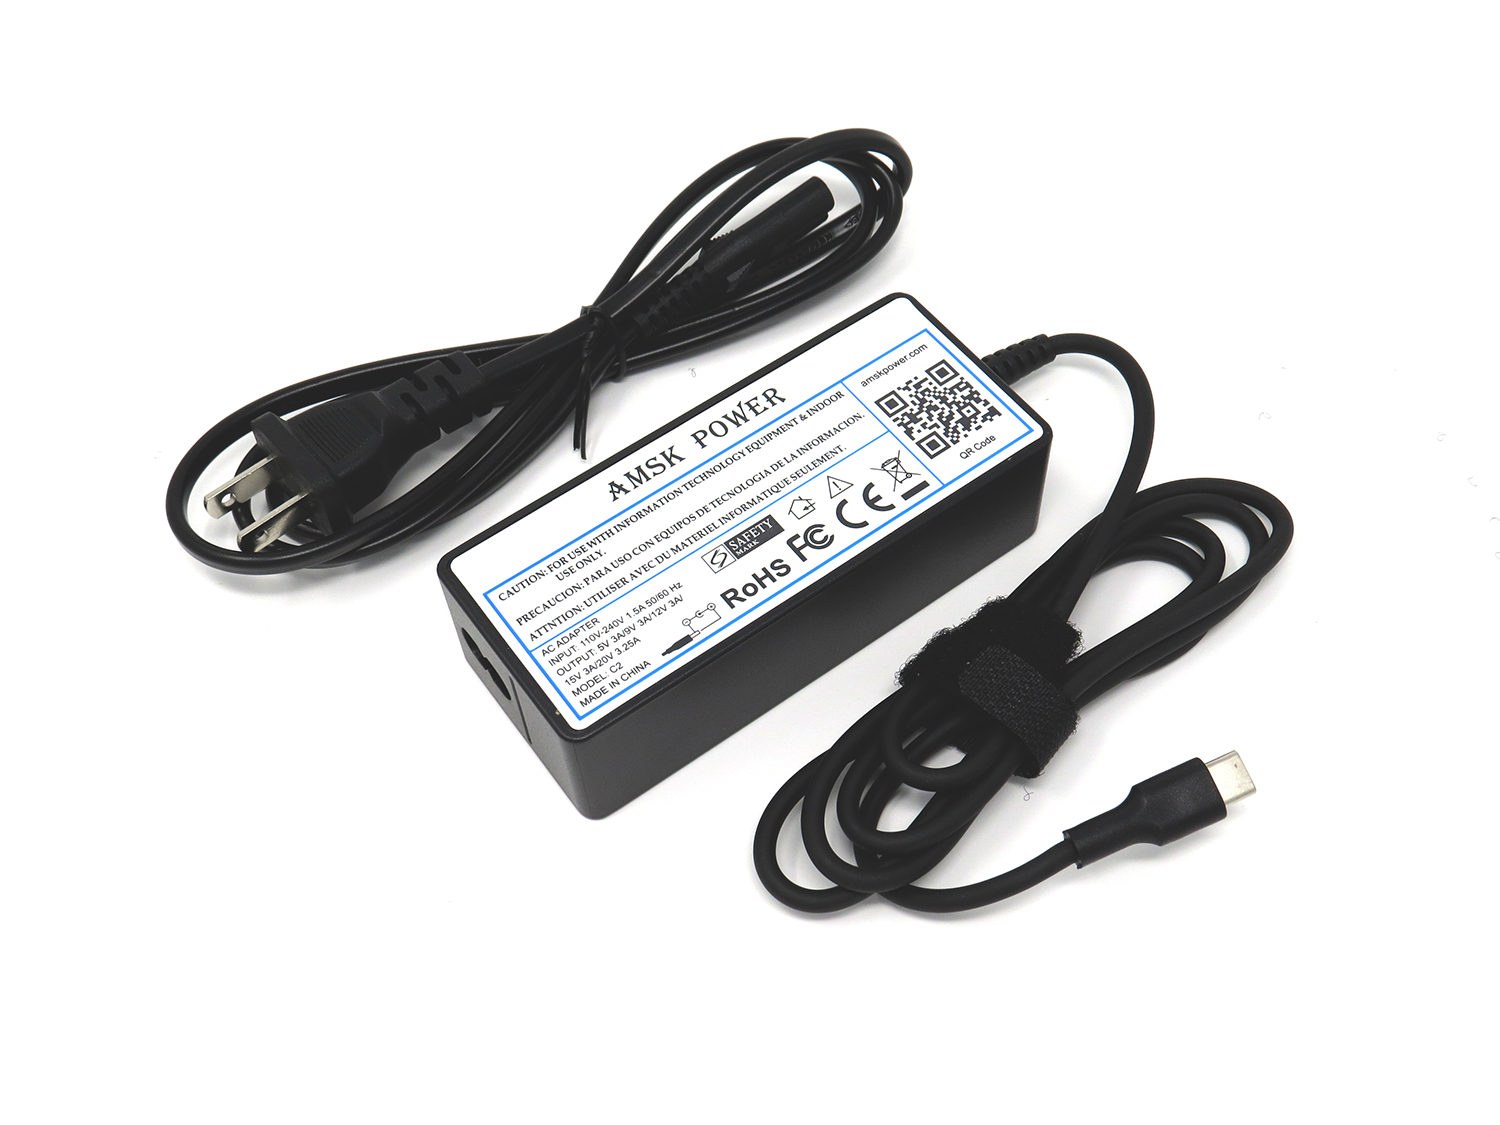 AMSK POWER Ac Adapter for Lenovo ThinkPad ADLX65YCC3A Laptop 65W USB Type-C Charger - image 1 of 1